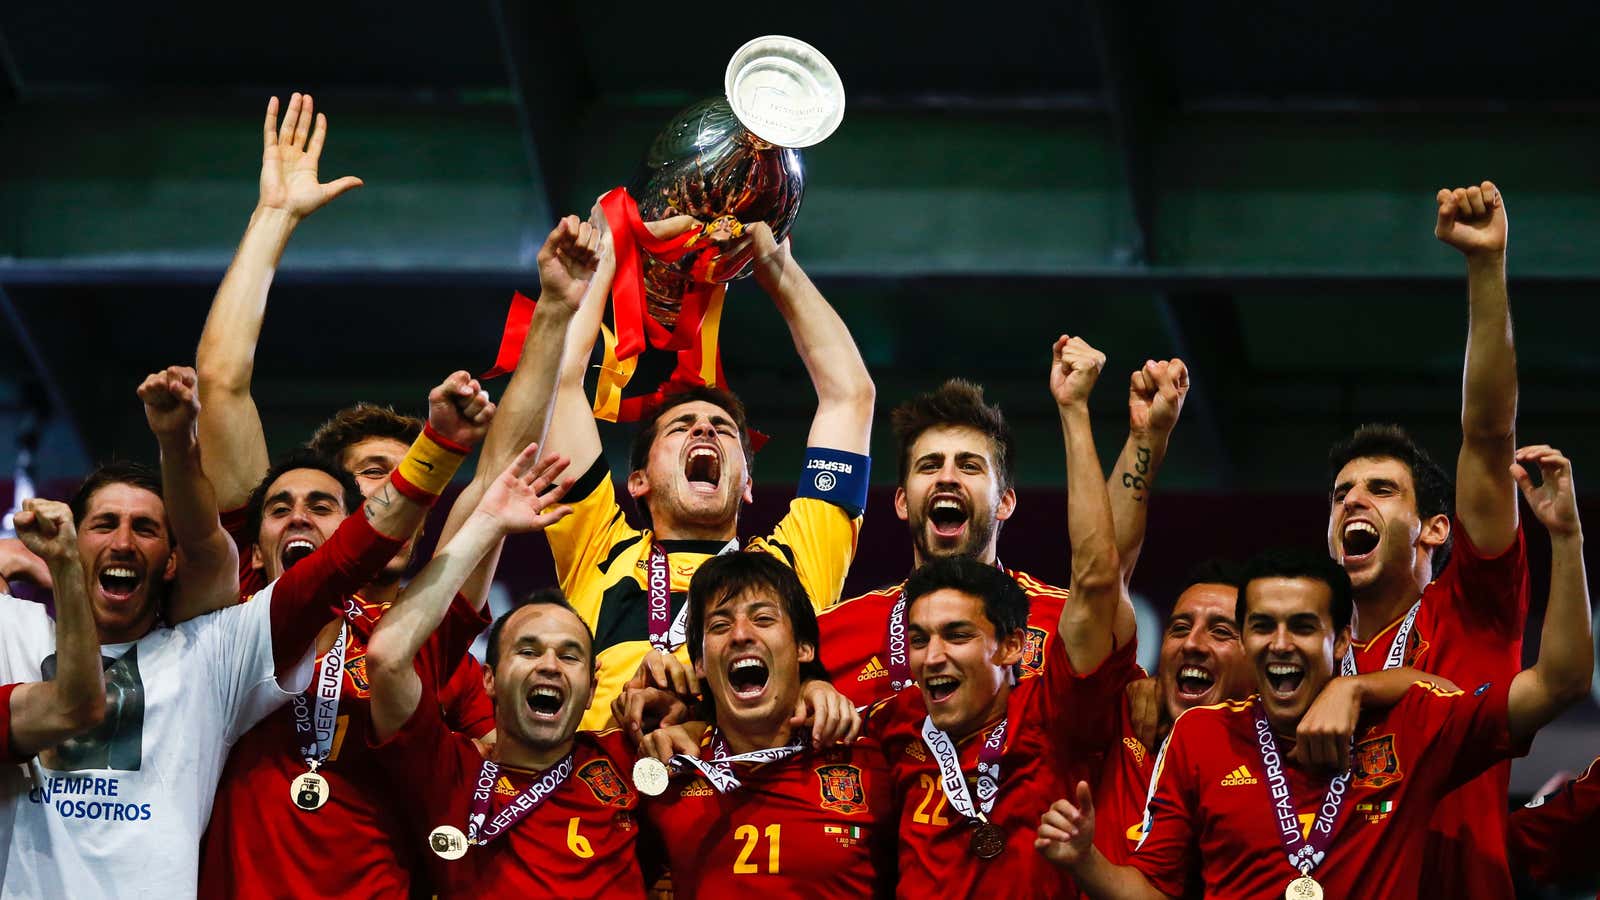 Will Spain repeat as champions?